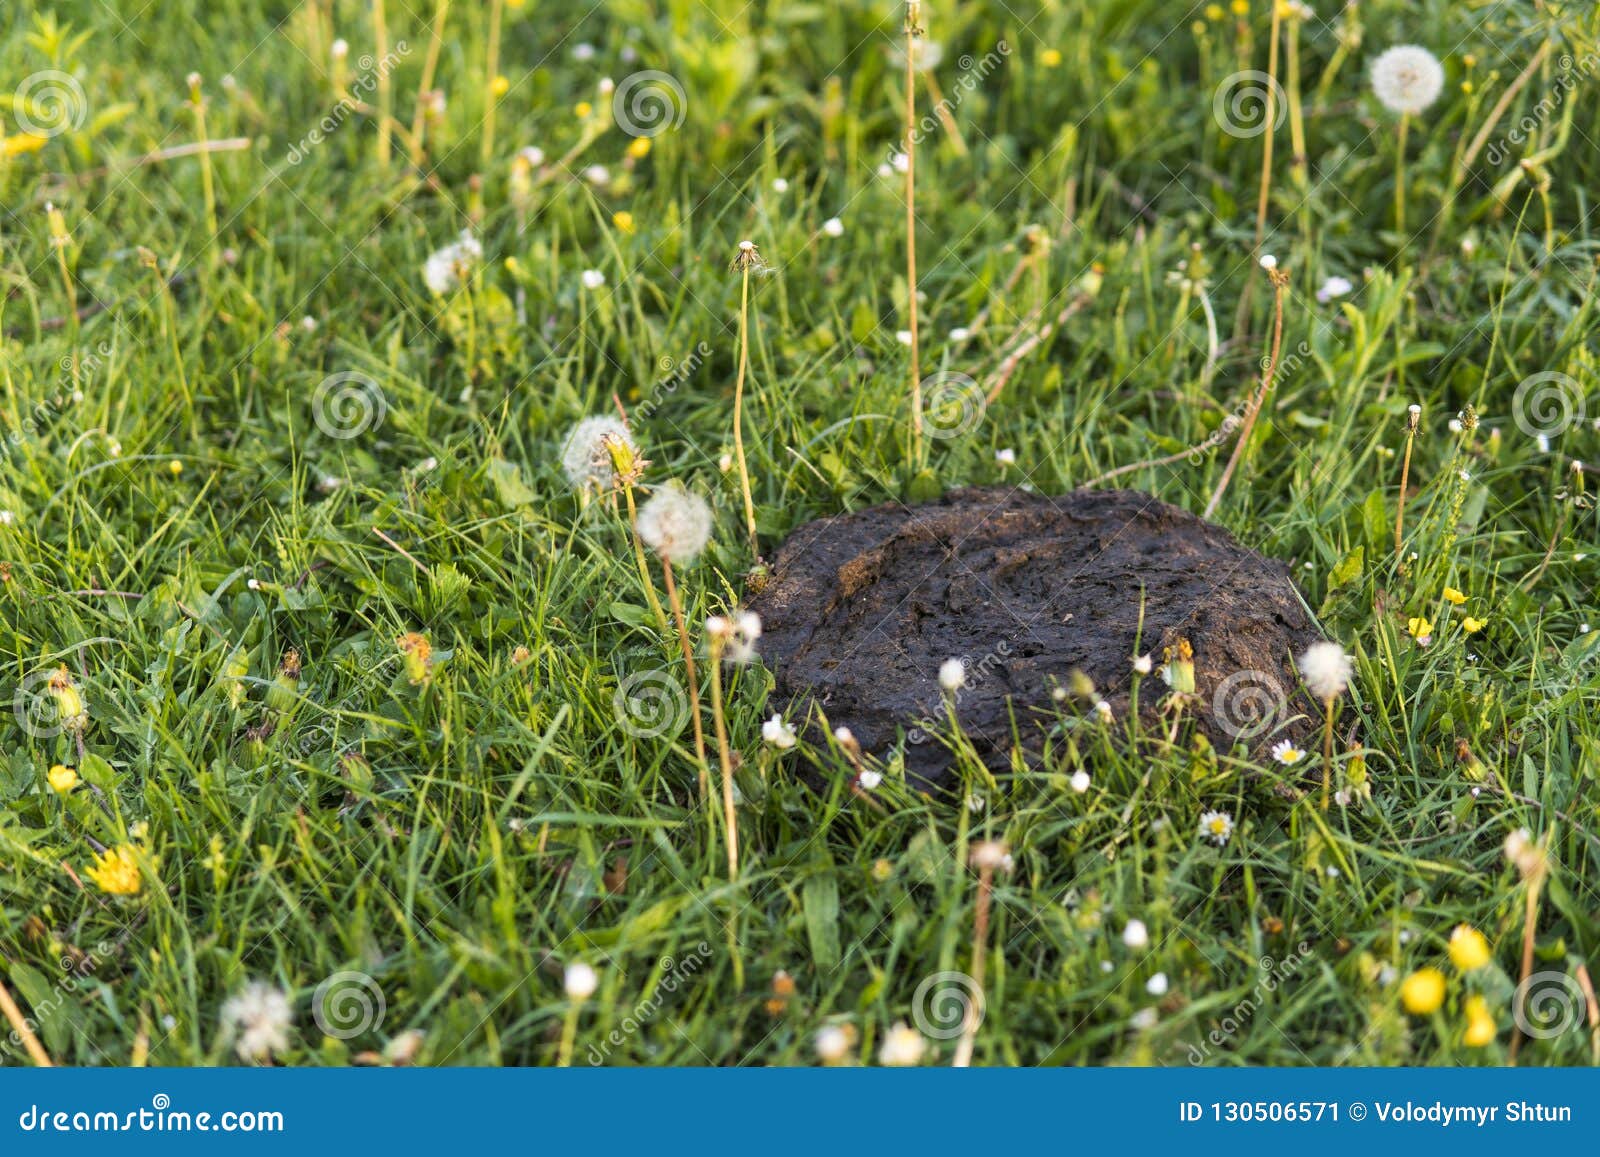 Dirty And Smelly Cow Shit In The Grass Cow Manure Stock Image